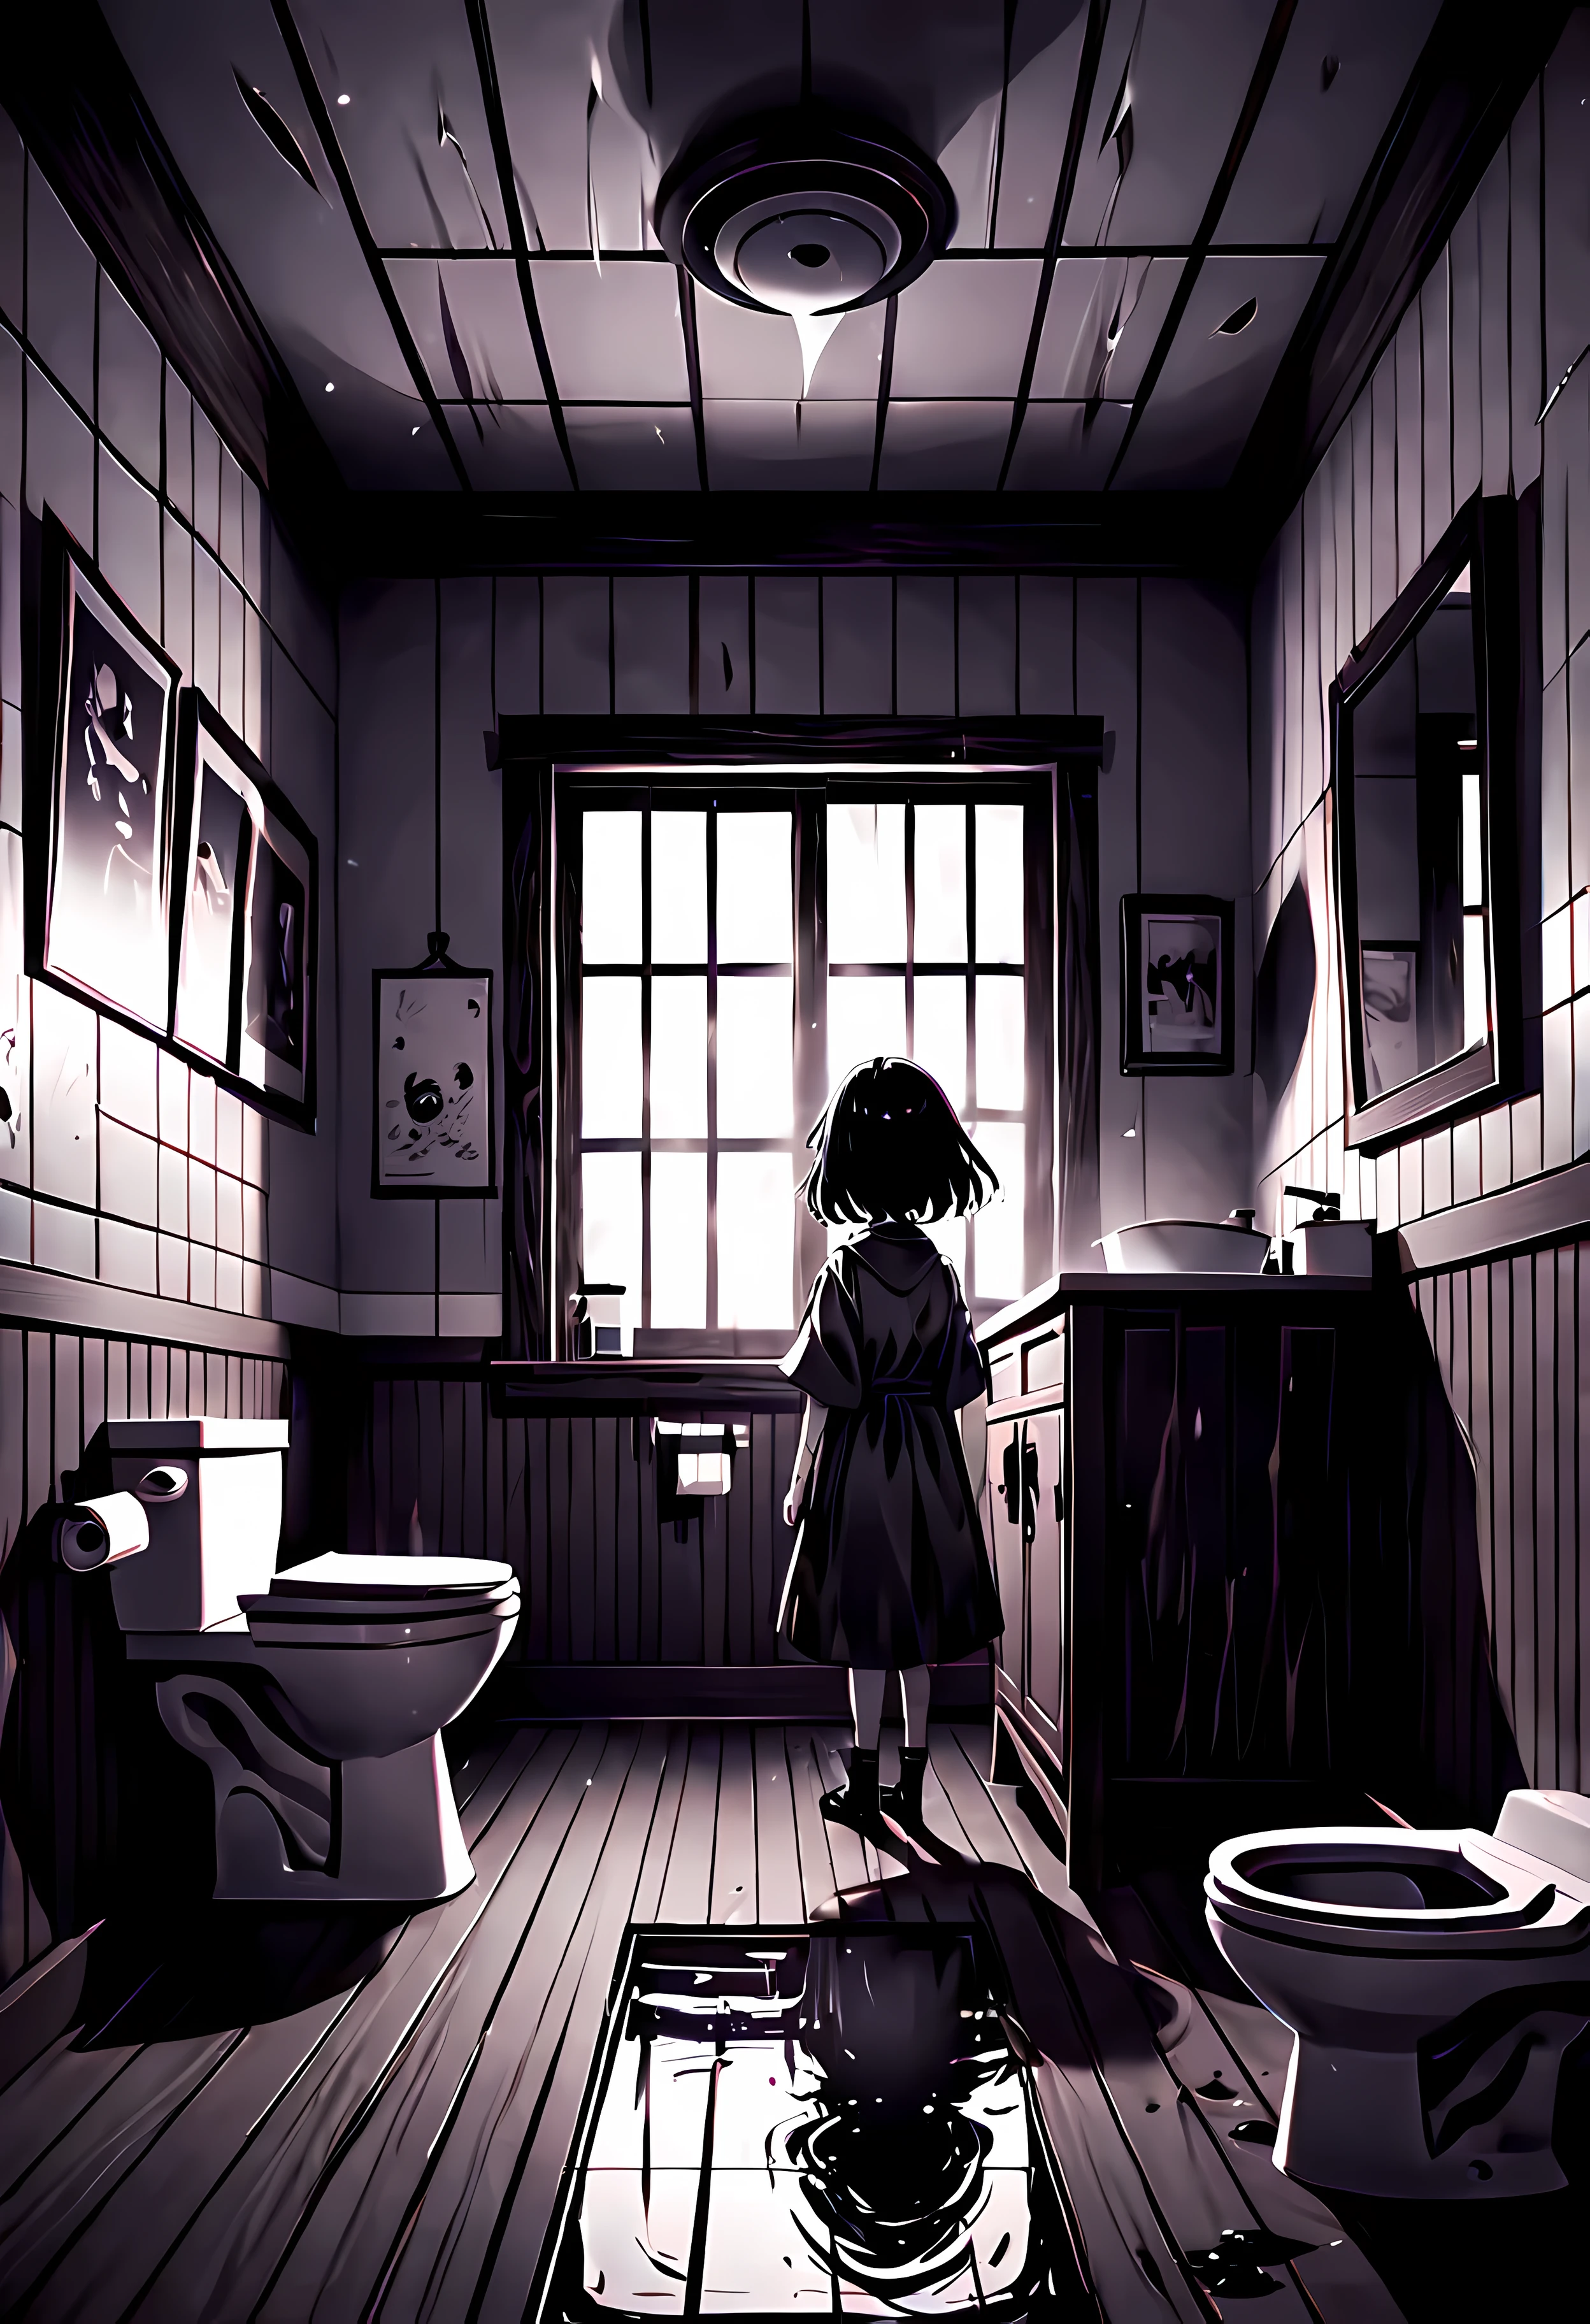 (best quality,4k,8k,highres,masterpiece:1.2),ultra-detailed,realistic:1.1,black and white,hatched lines,detailed linework in a Japanese line art style,creepy and eerie toilet room scene,jagged shadows,stark contrast between light and dark,gritty texture,ominous mood,distorted perspective,subtle hints of blood,horror manga-inspired ,ominous aura surrounding the room,spooky ambiance,subtle hints of paranormal activity,unsettling atmosphere,ghostly figures lurking in the shadows.